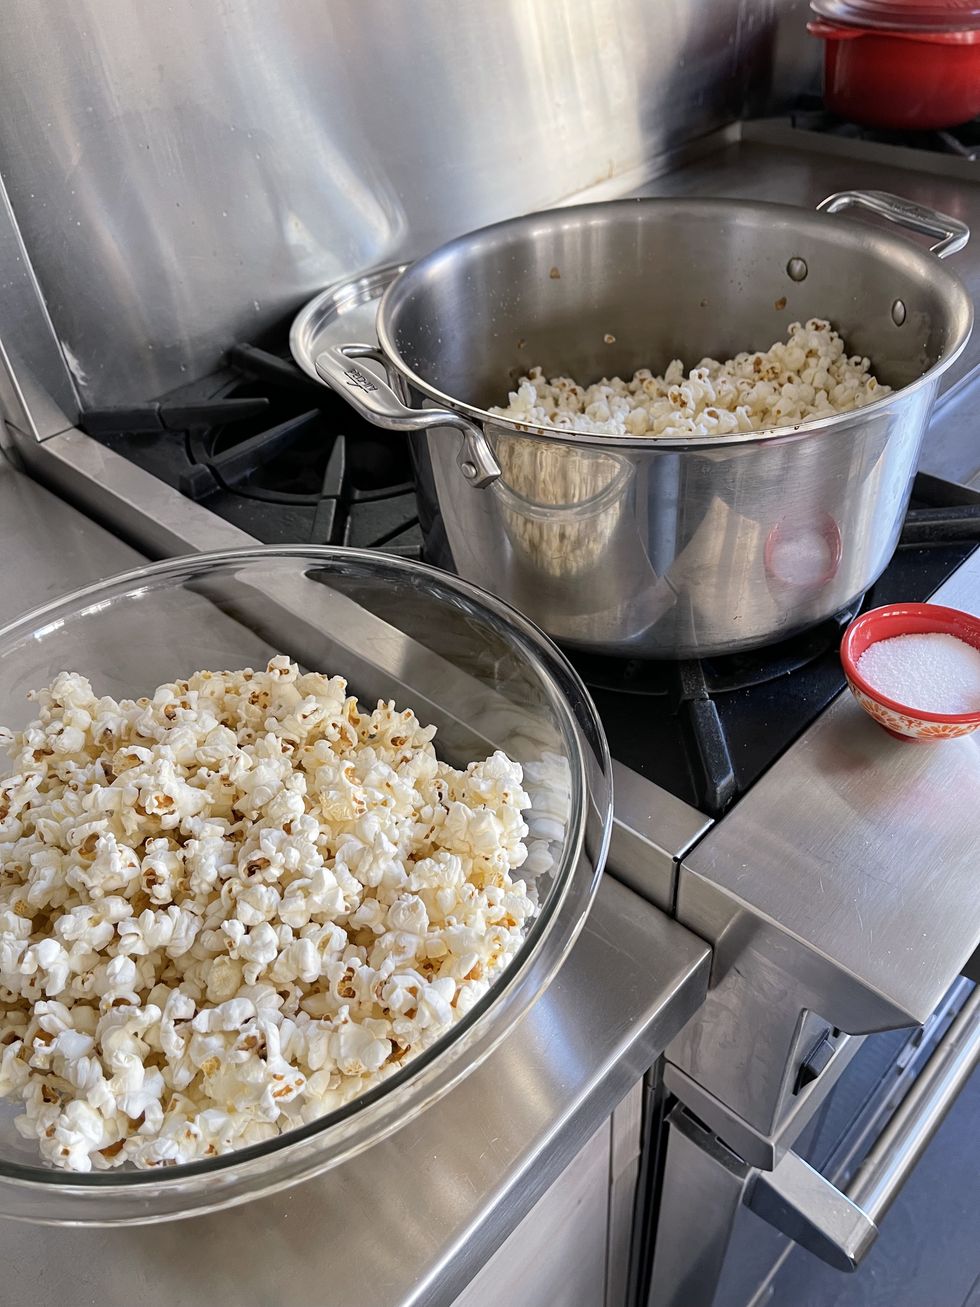 Stovetop Popcorn with step-by-step photos